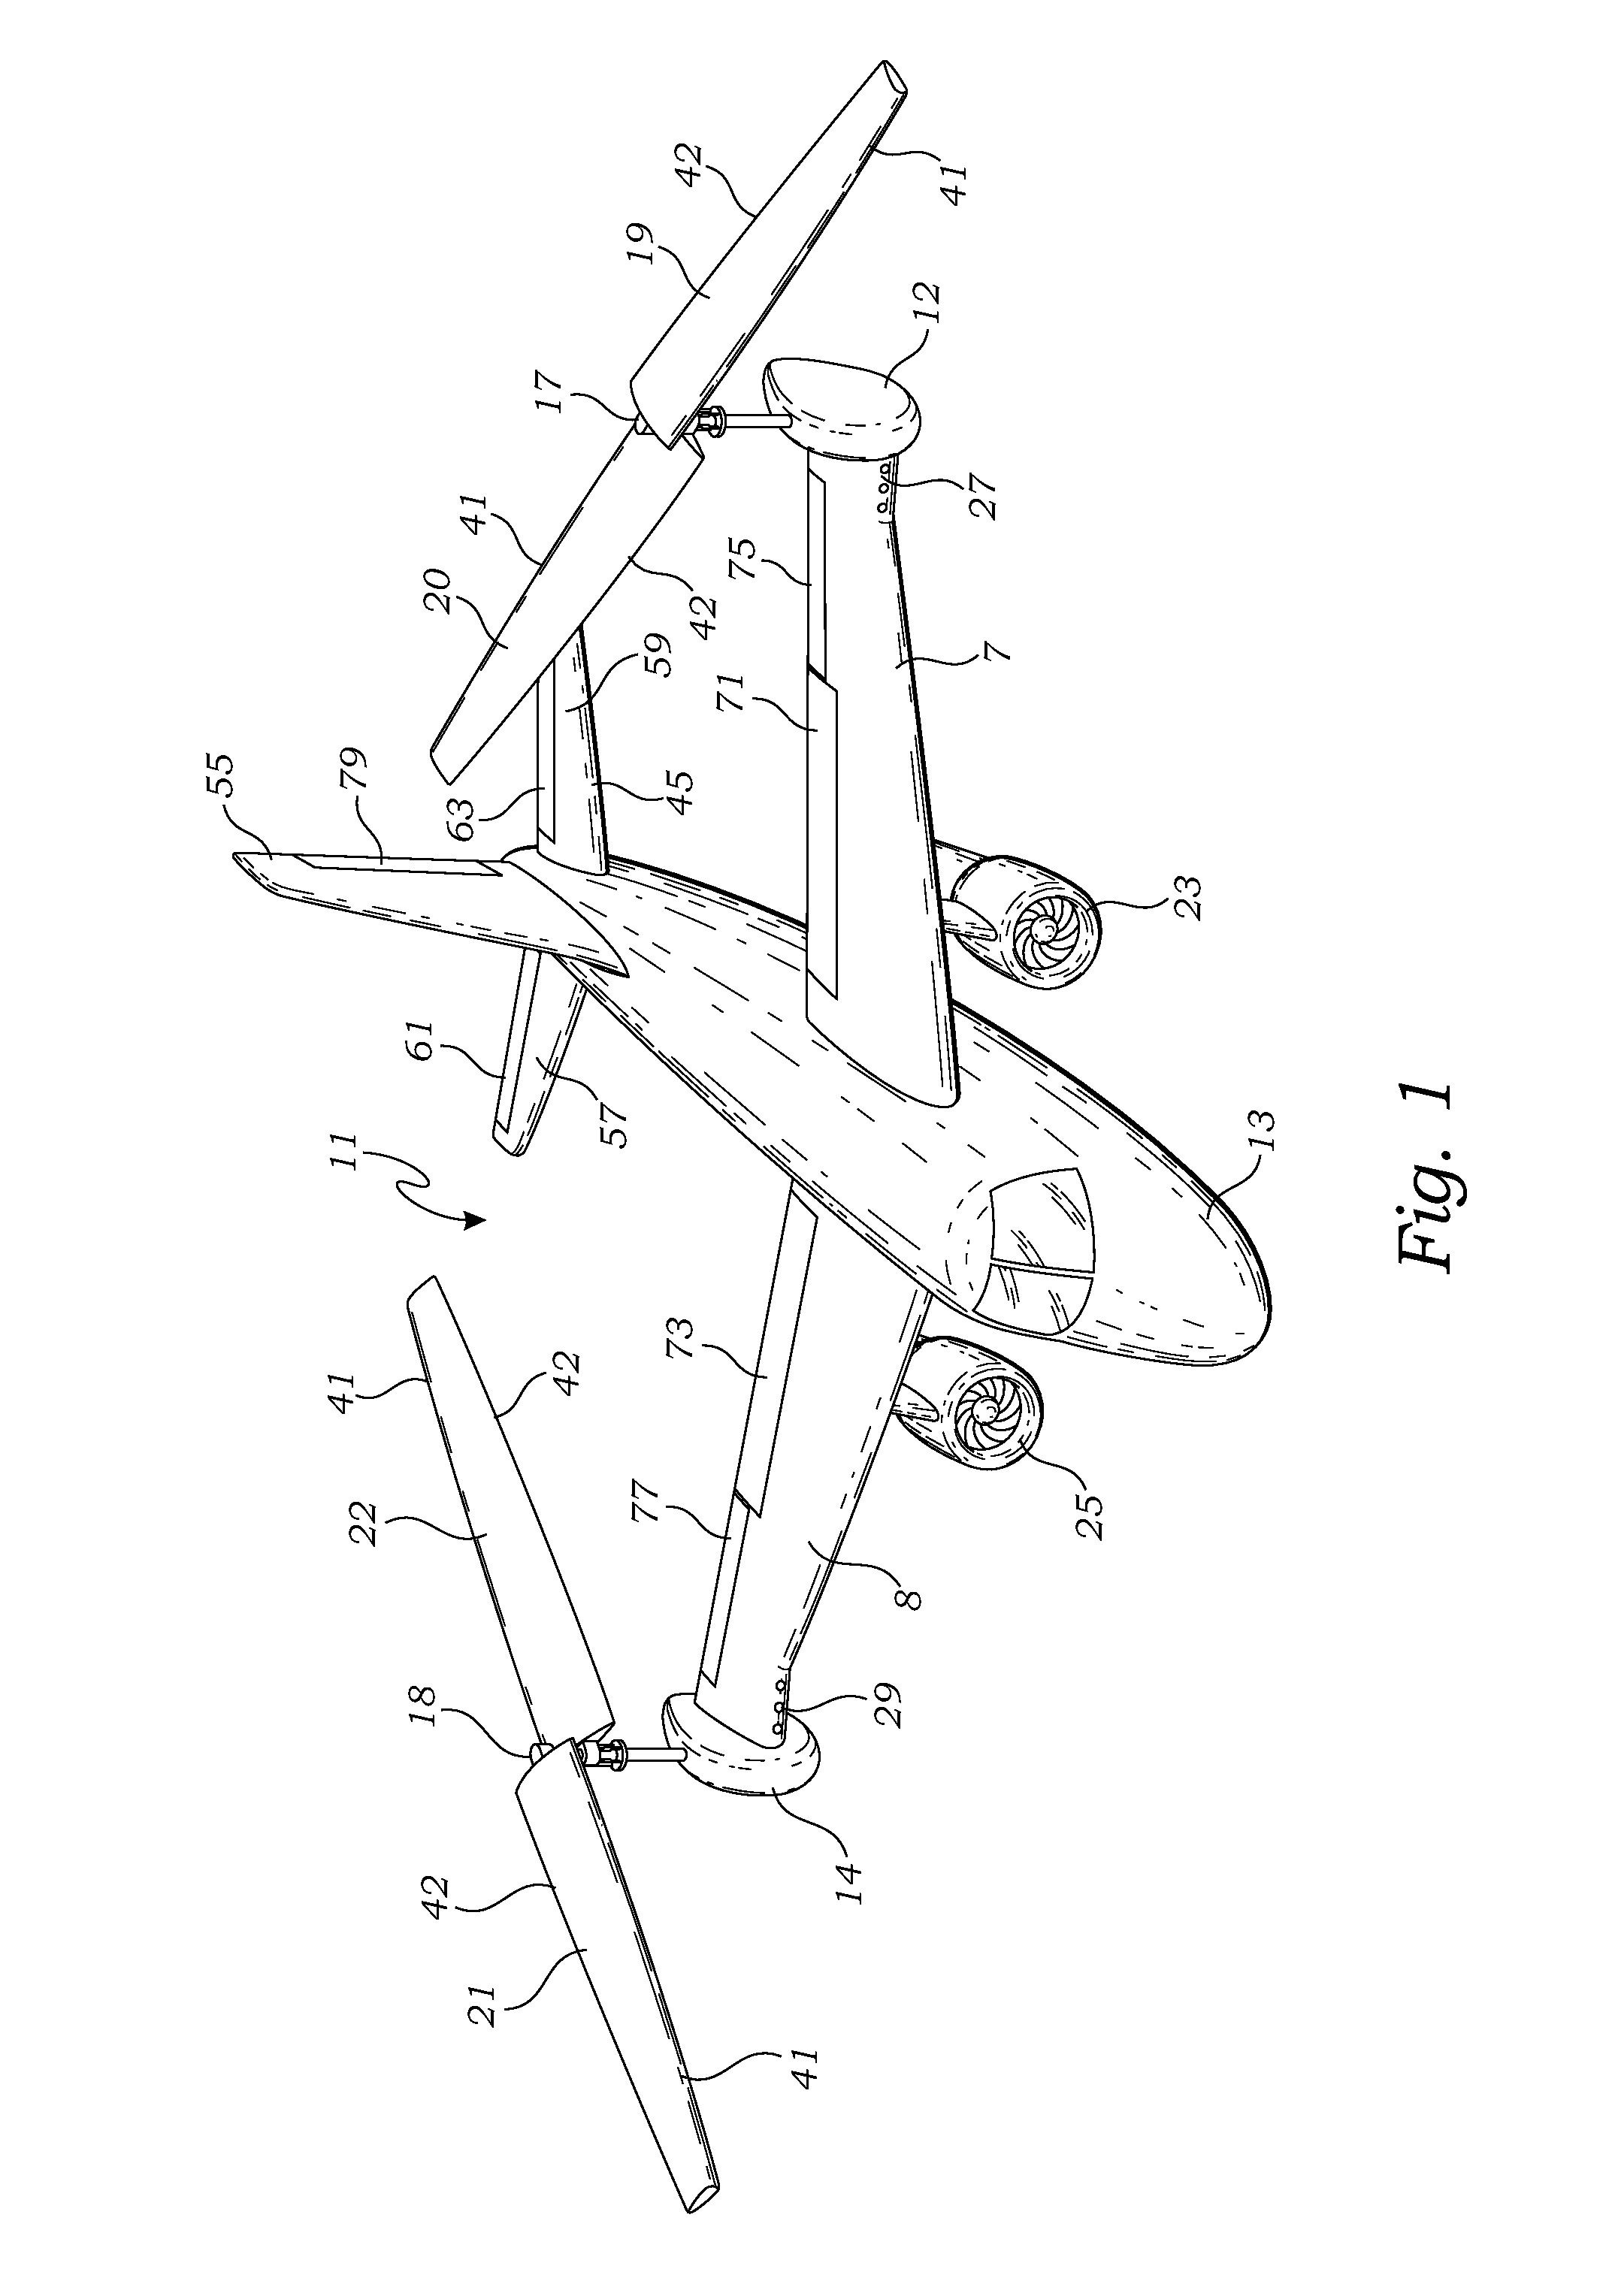 Rotor for a dual mode aircraft